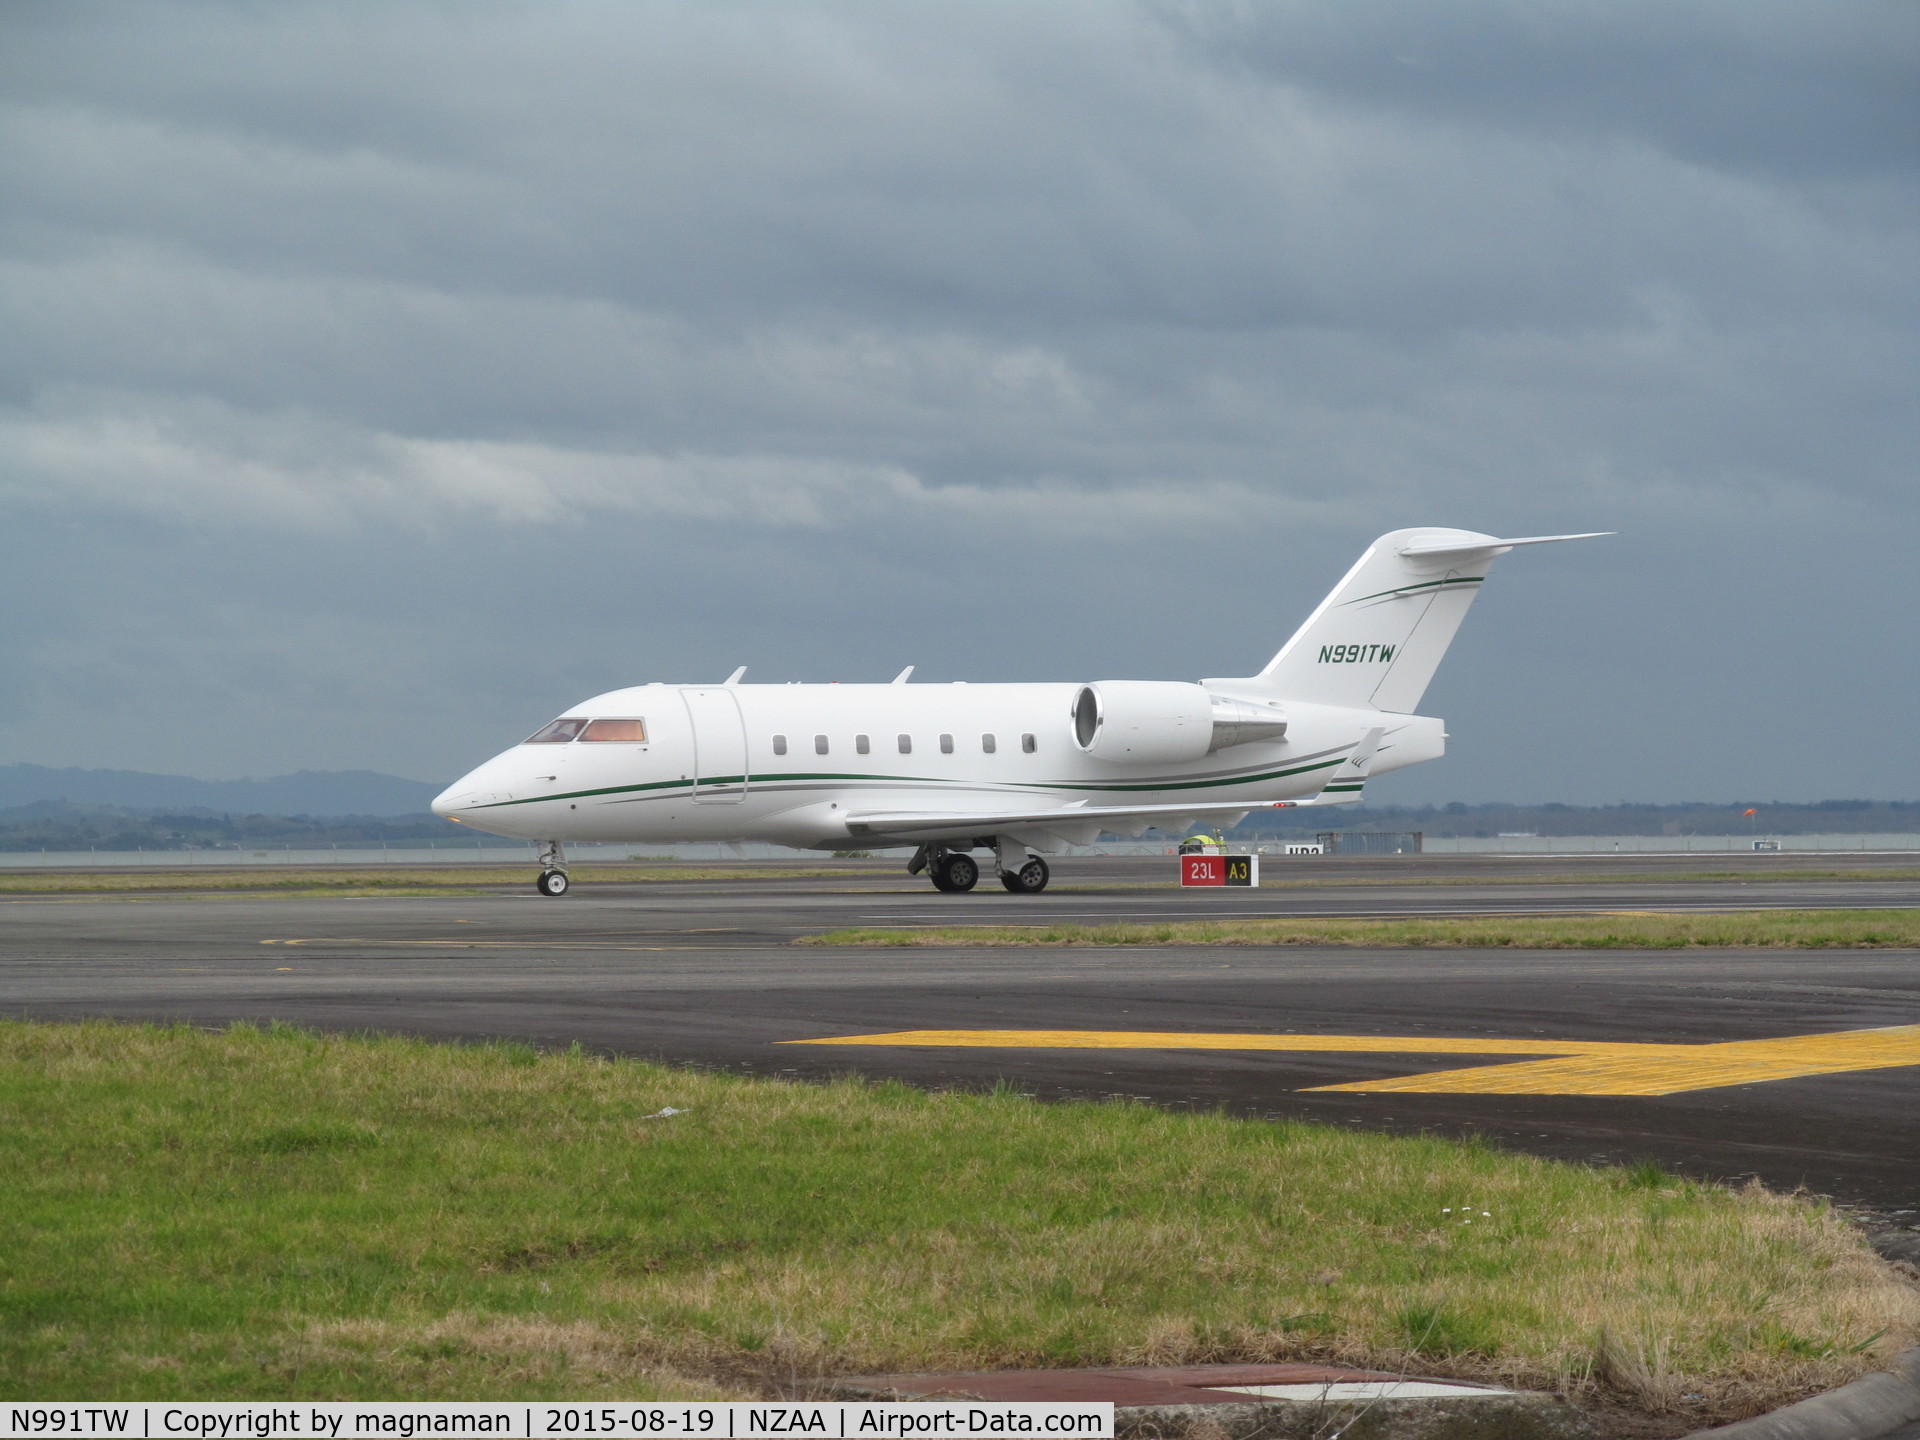 N991TW, 1997 Canadair Challenger 604 (CL-600-2B16) C/N 5333, taxying to stand